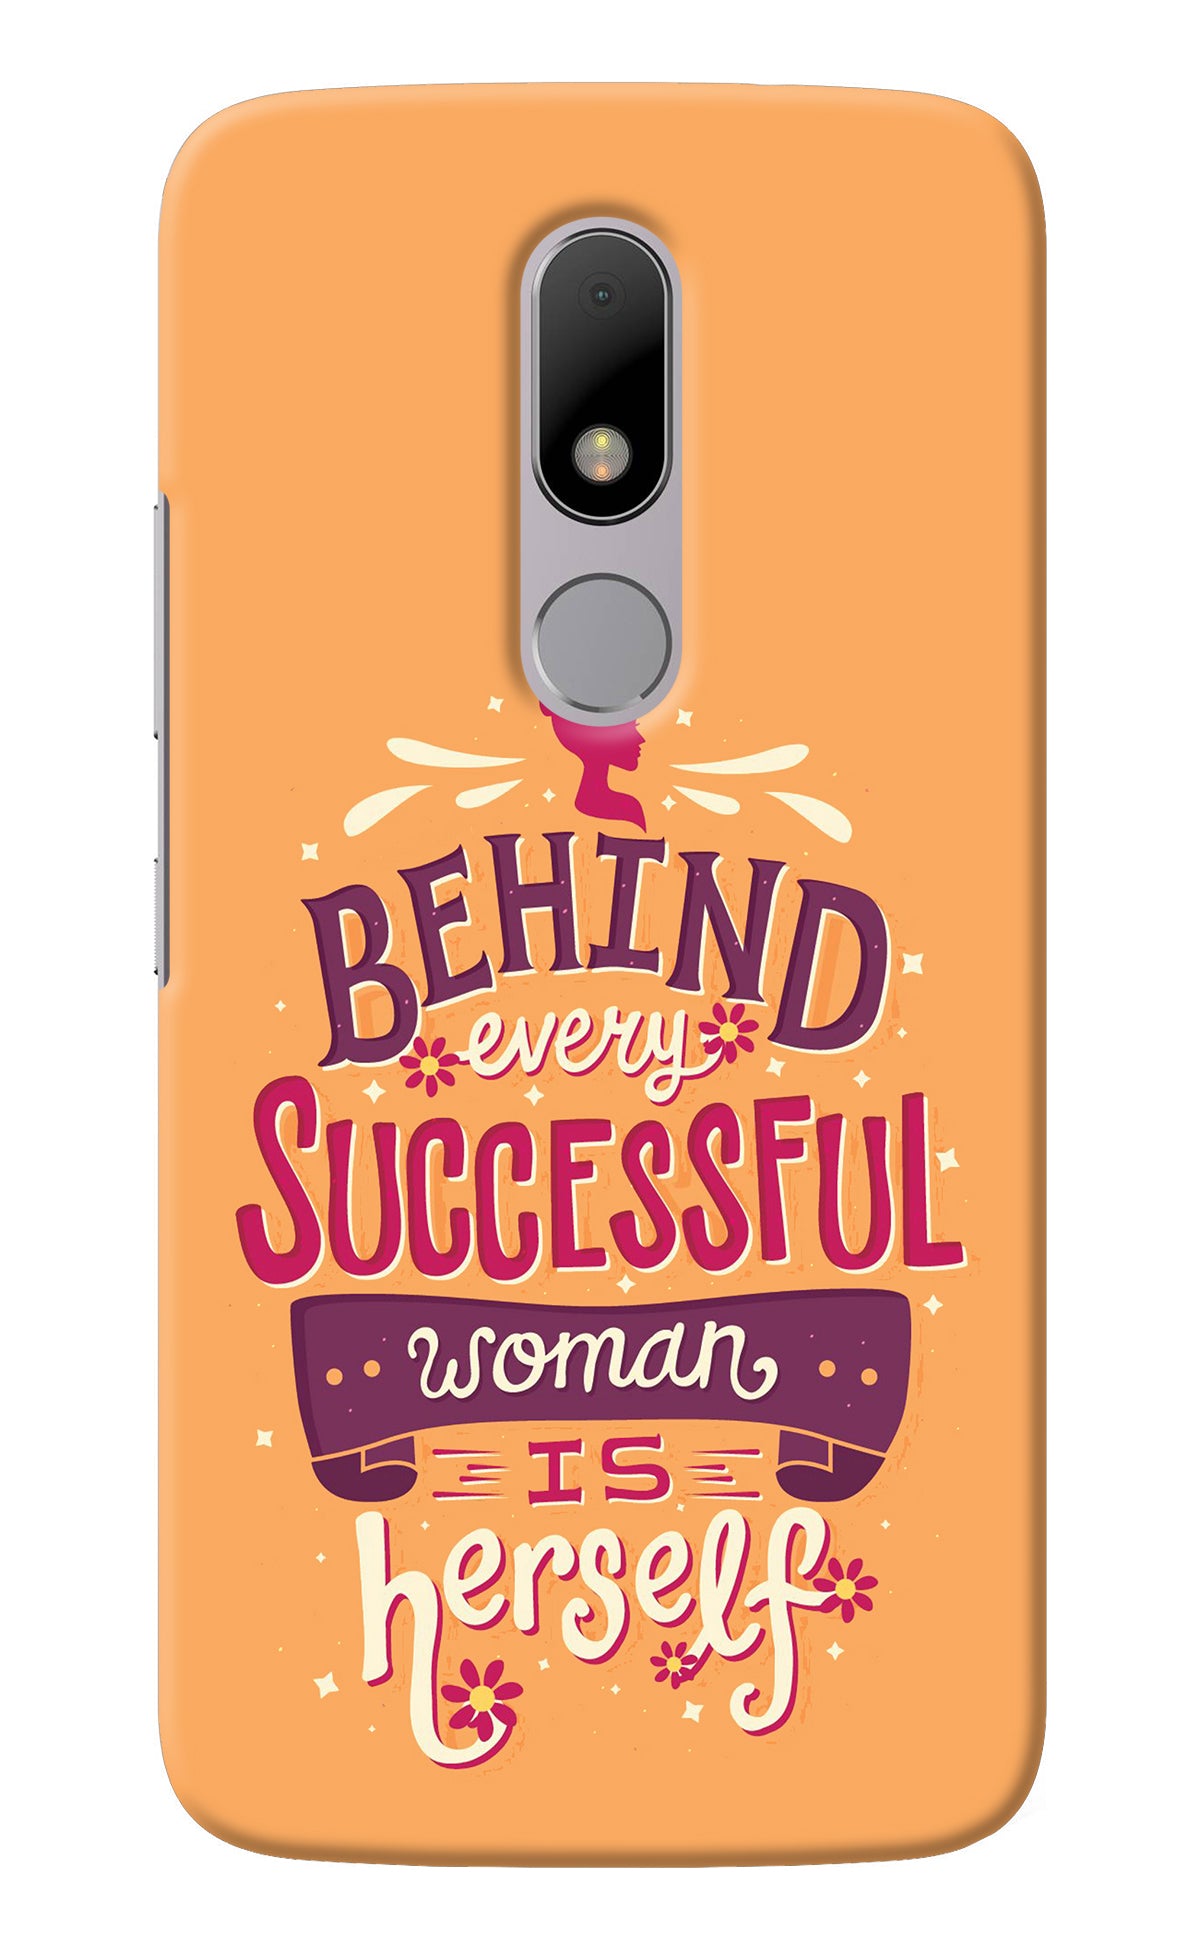 Behind Every Successful Woman There Is Herself Moto M Back Cover